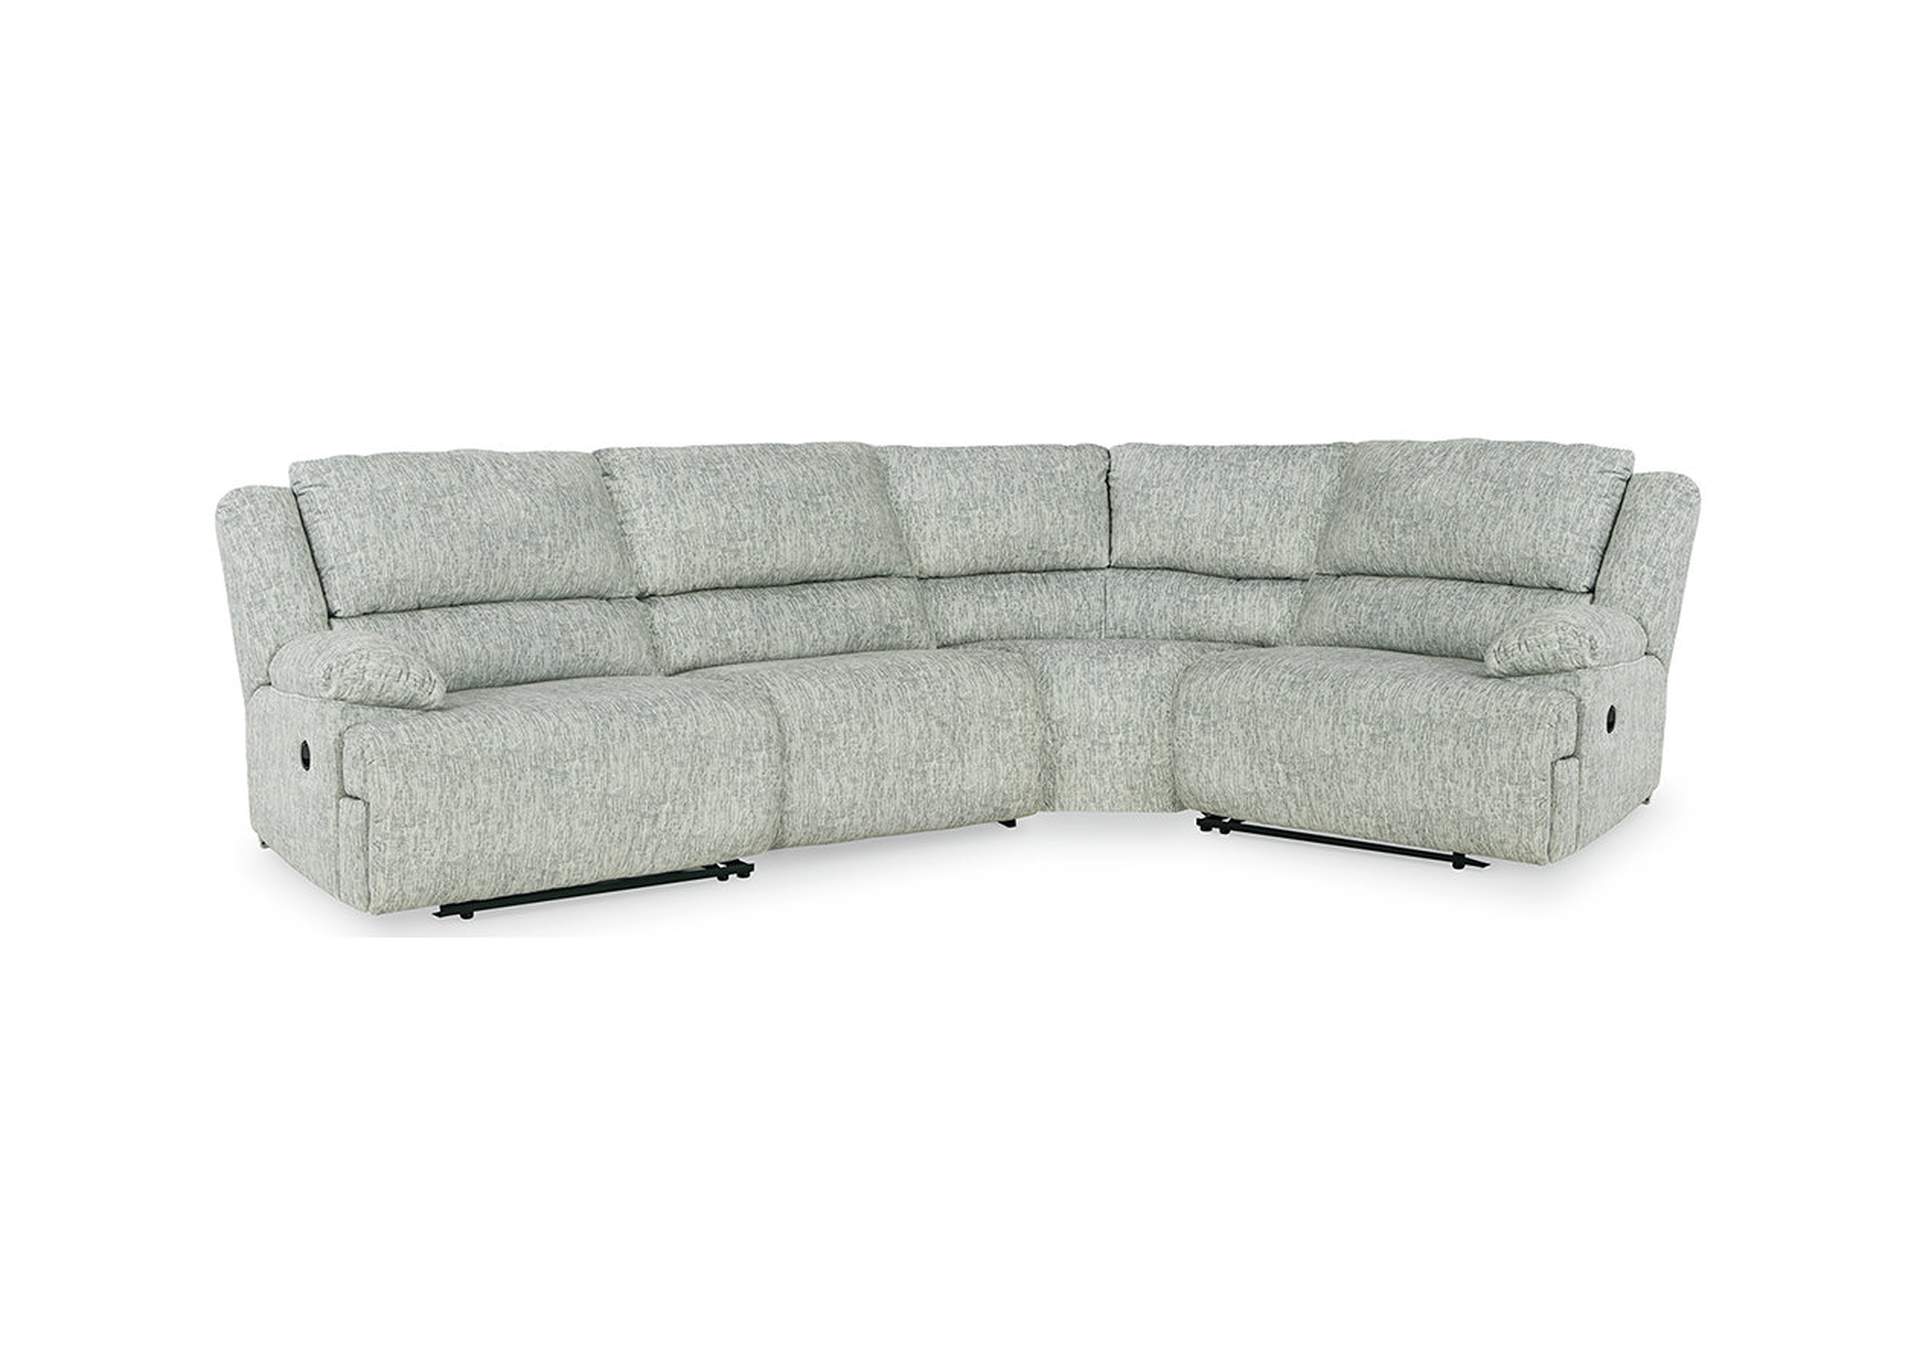 McClelland 4-Piece Reclining Sectional,Signature Design By Ashley